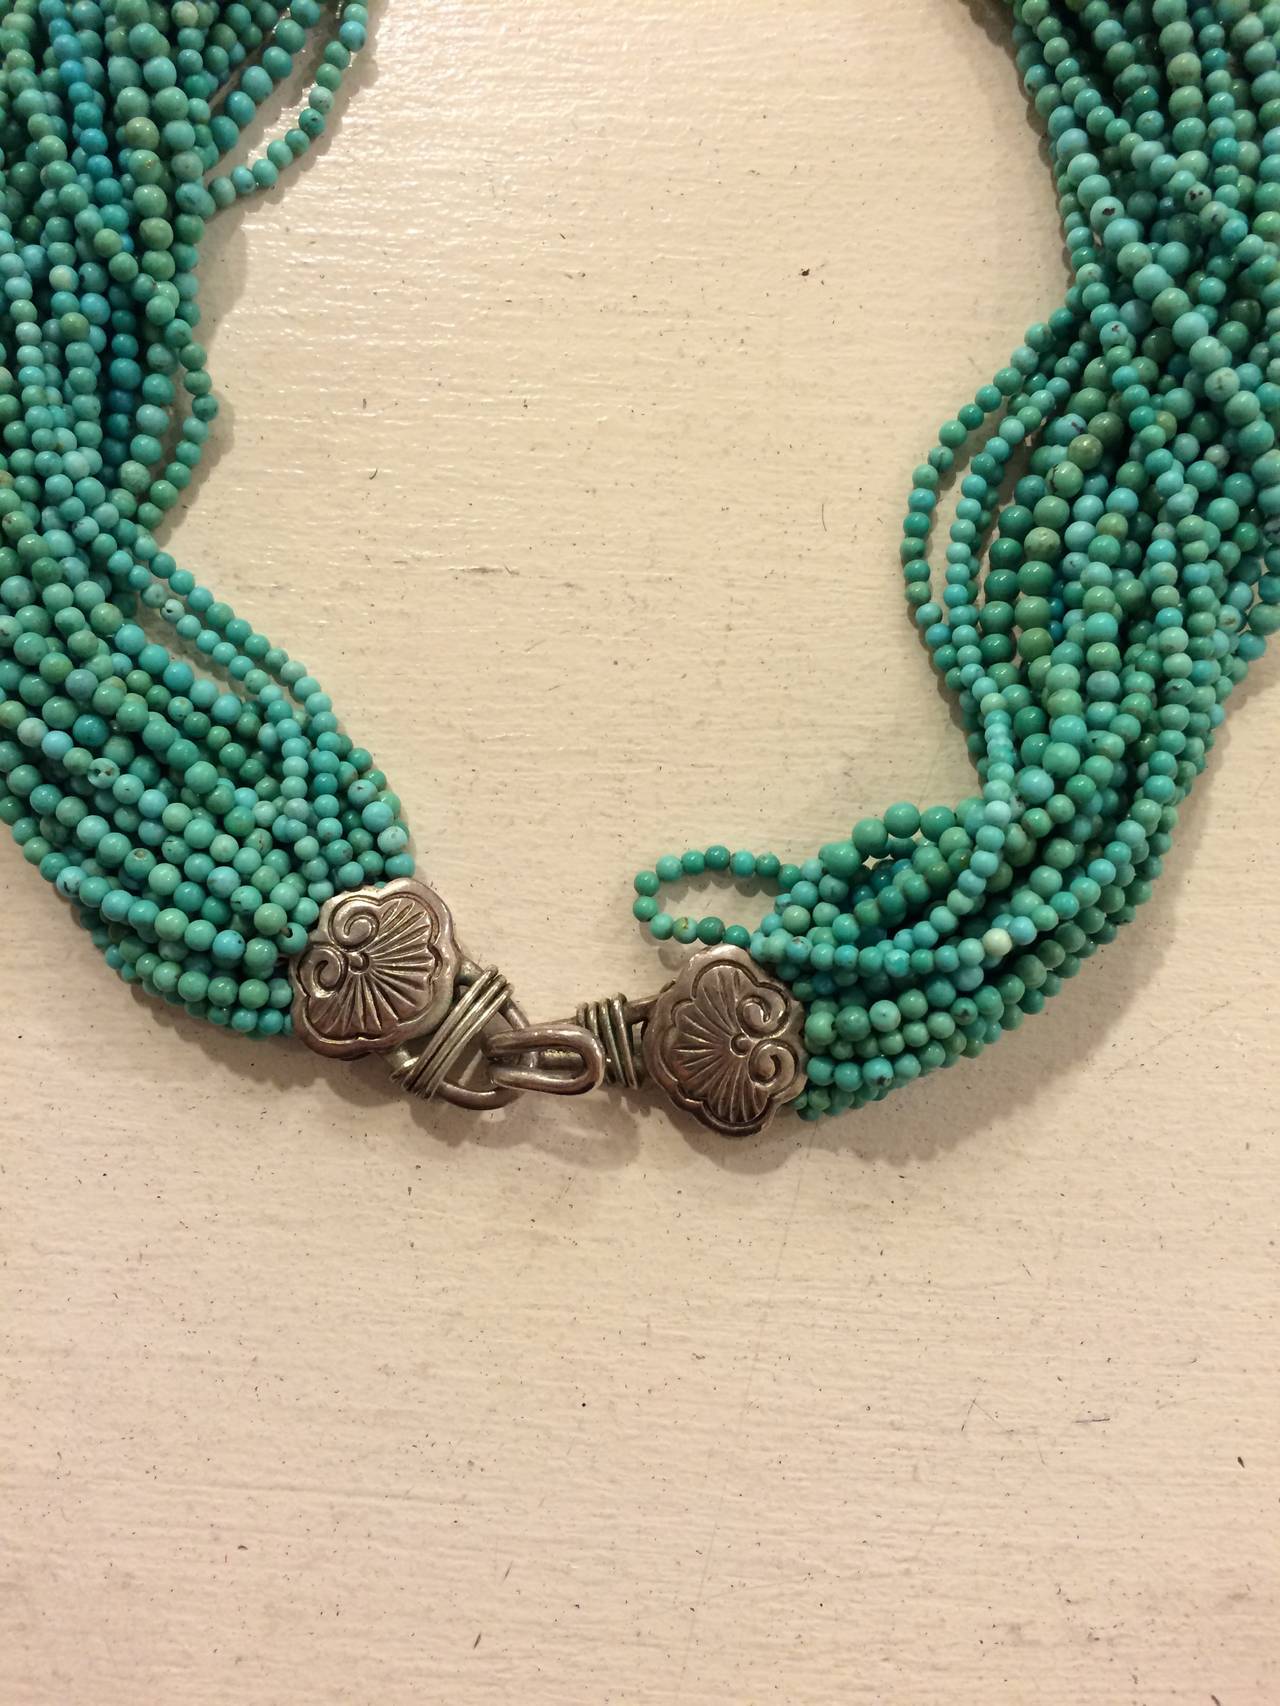 Turquoise and silver are a timeless combination. Evoking the Southwestern landscape, this necklace is like a precious heirloom - the pendant is even signed by the artist, as seen in image four. Multiple strands of turquoise seed beads form a collar